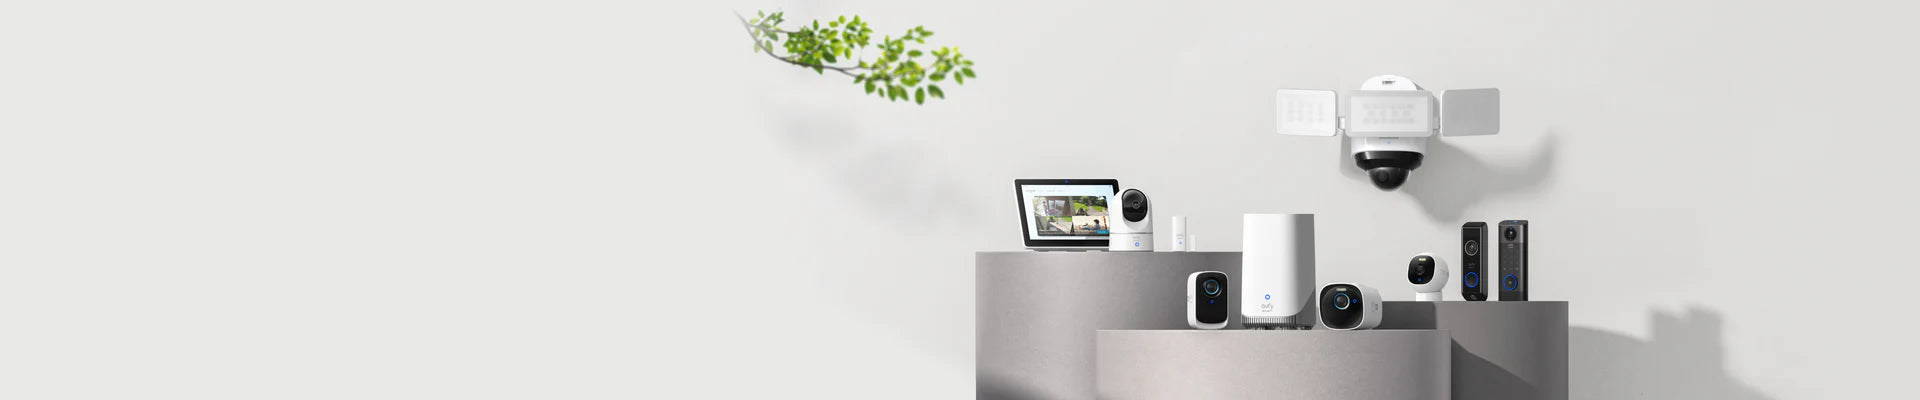 EUFY Smart Home Security Cameras and Devices